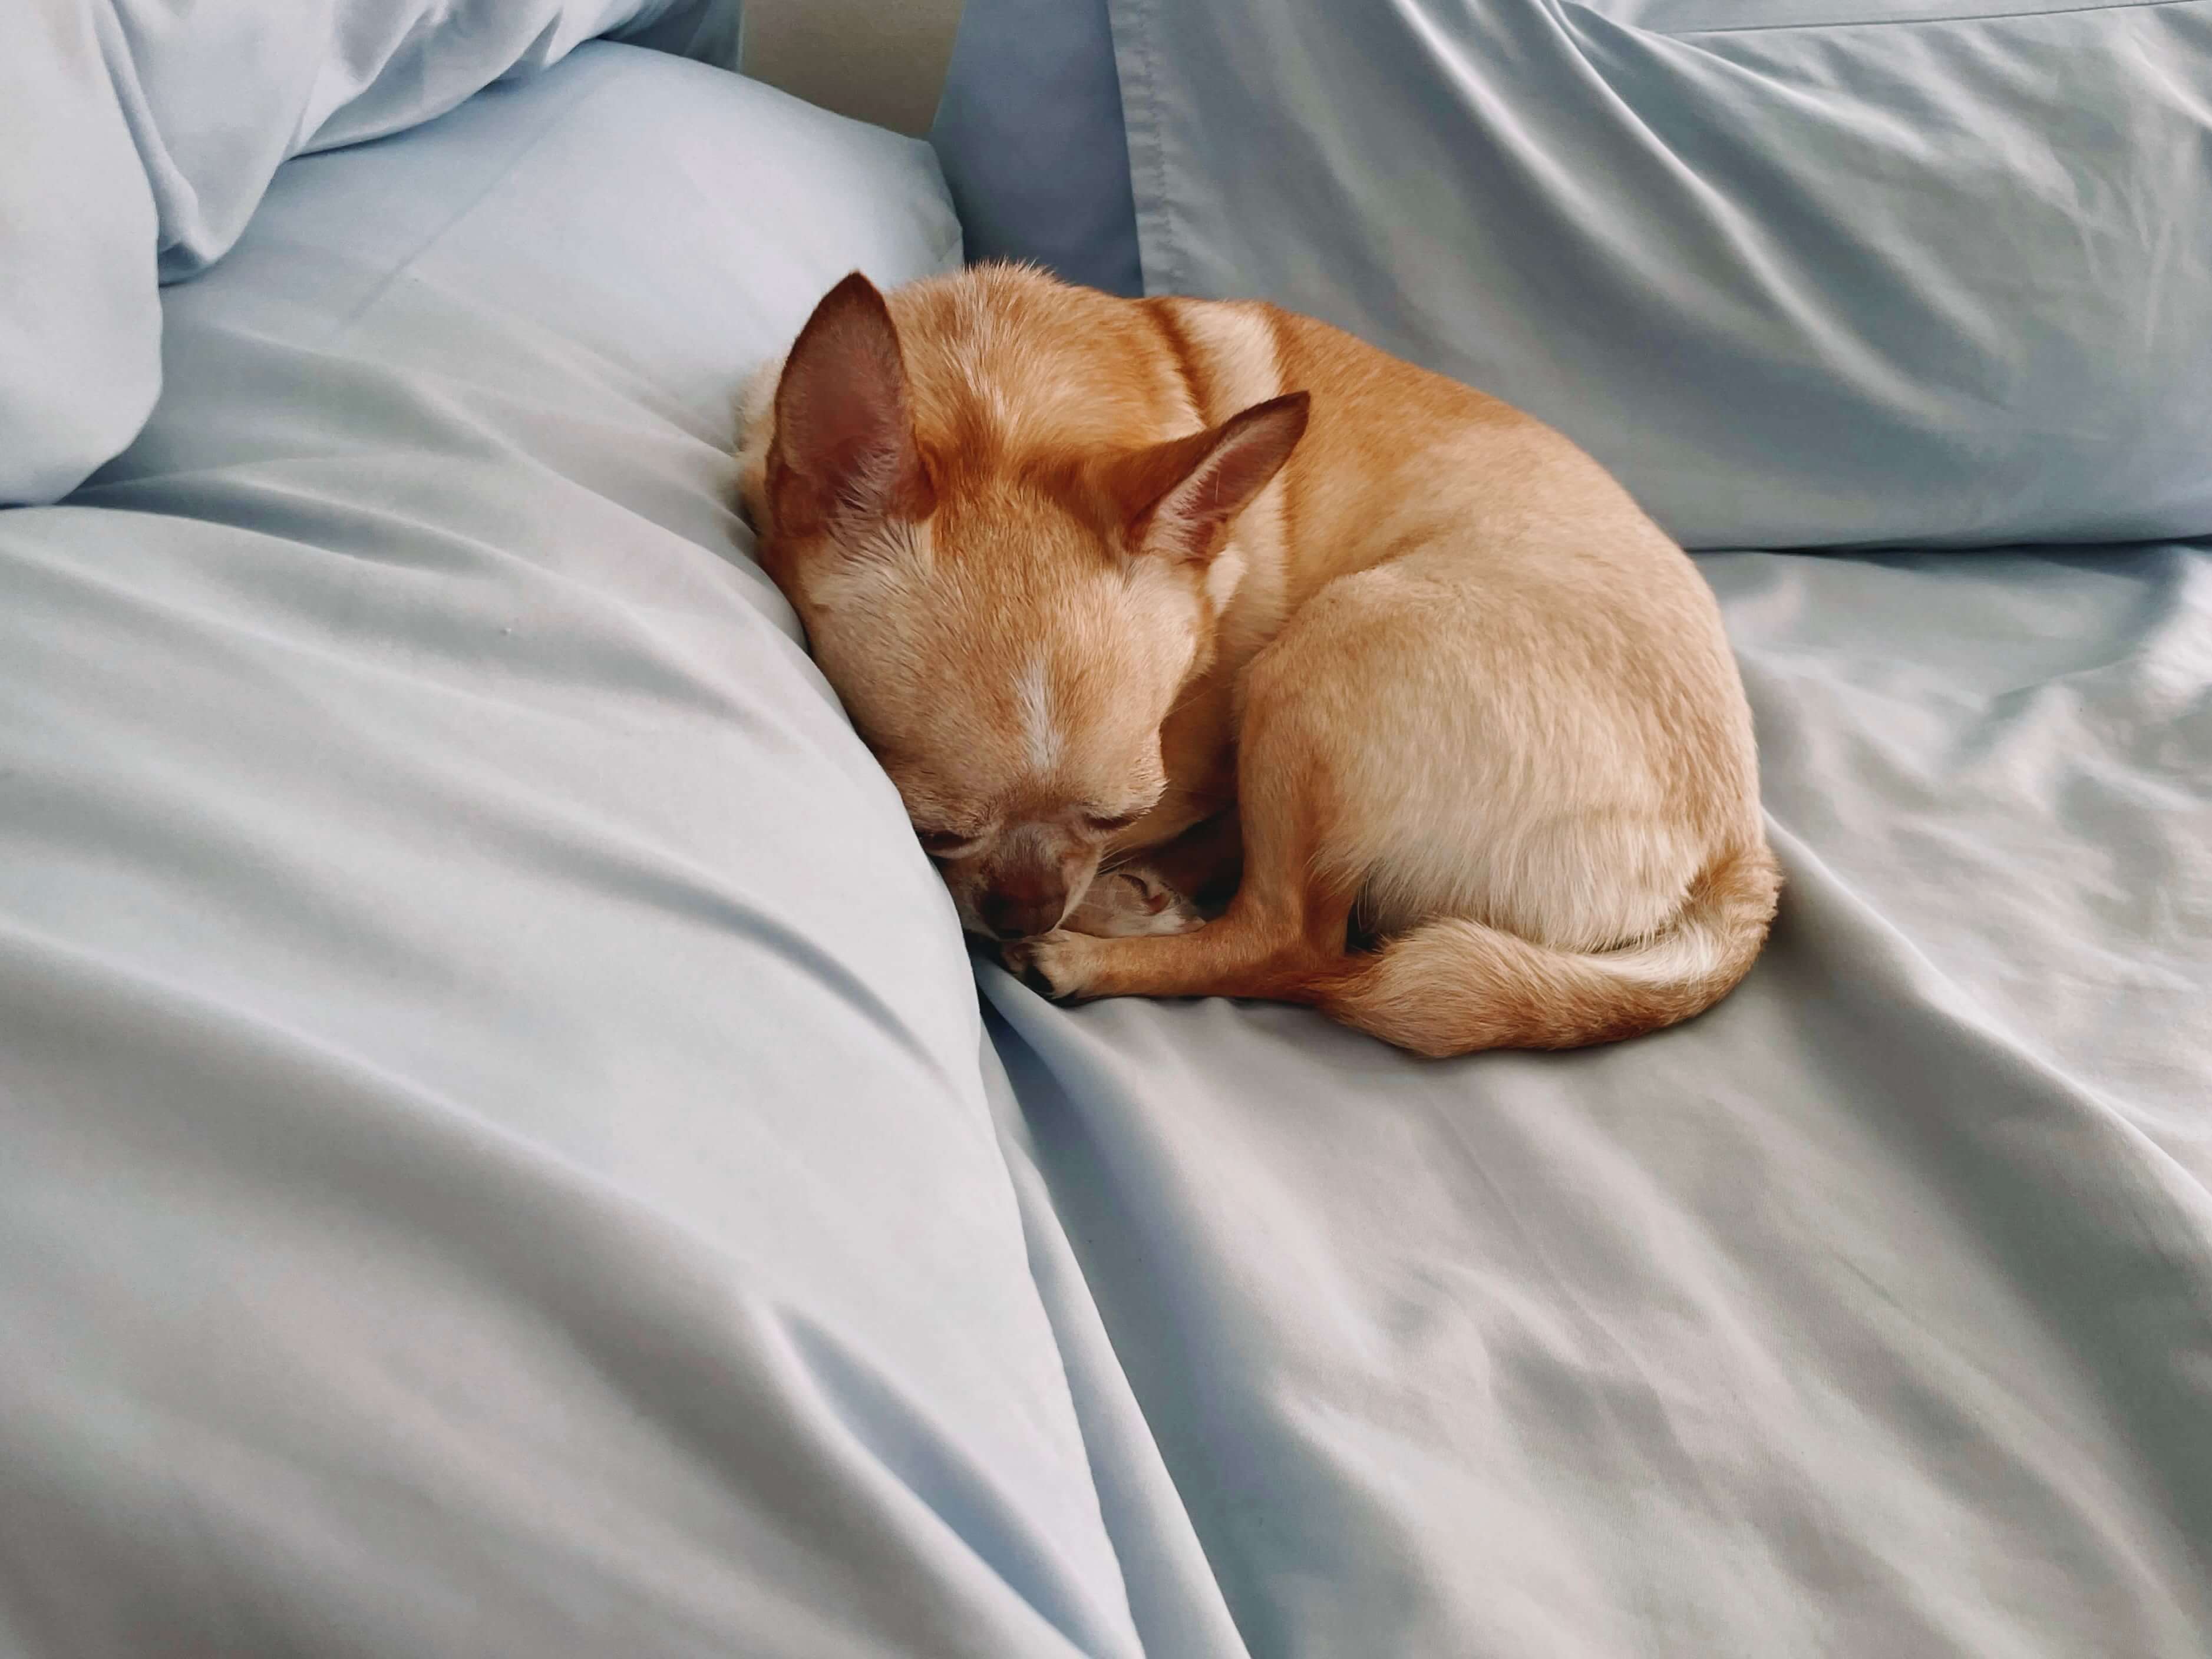 Fawn chihuahua all curled up